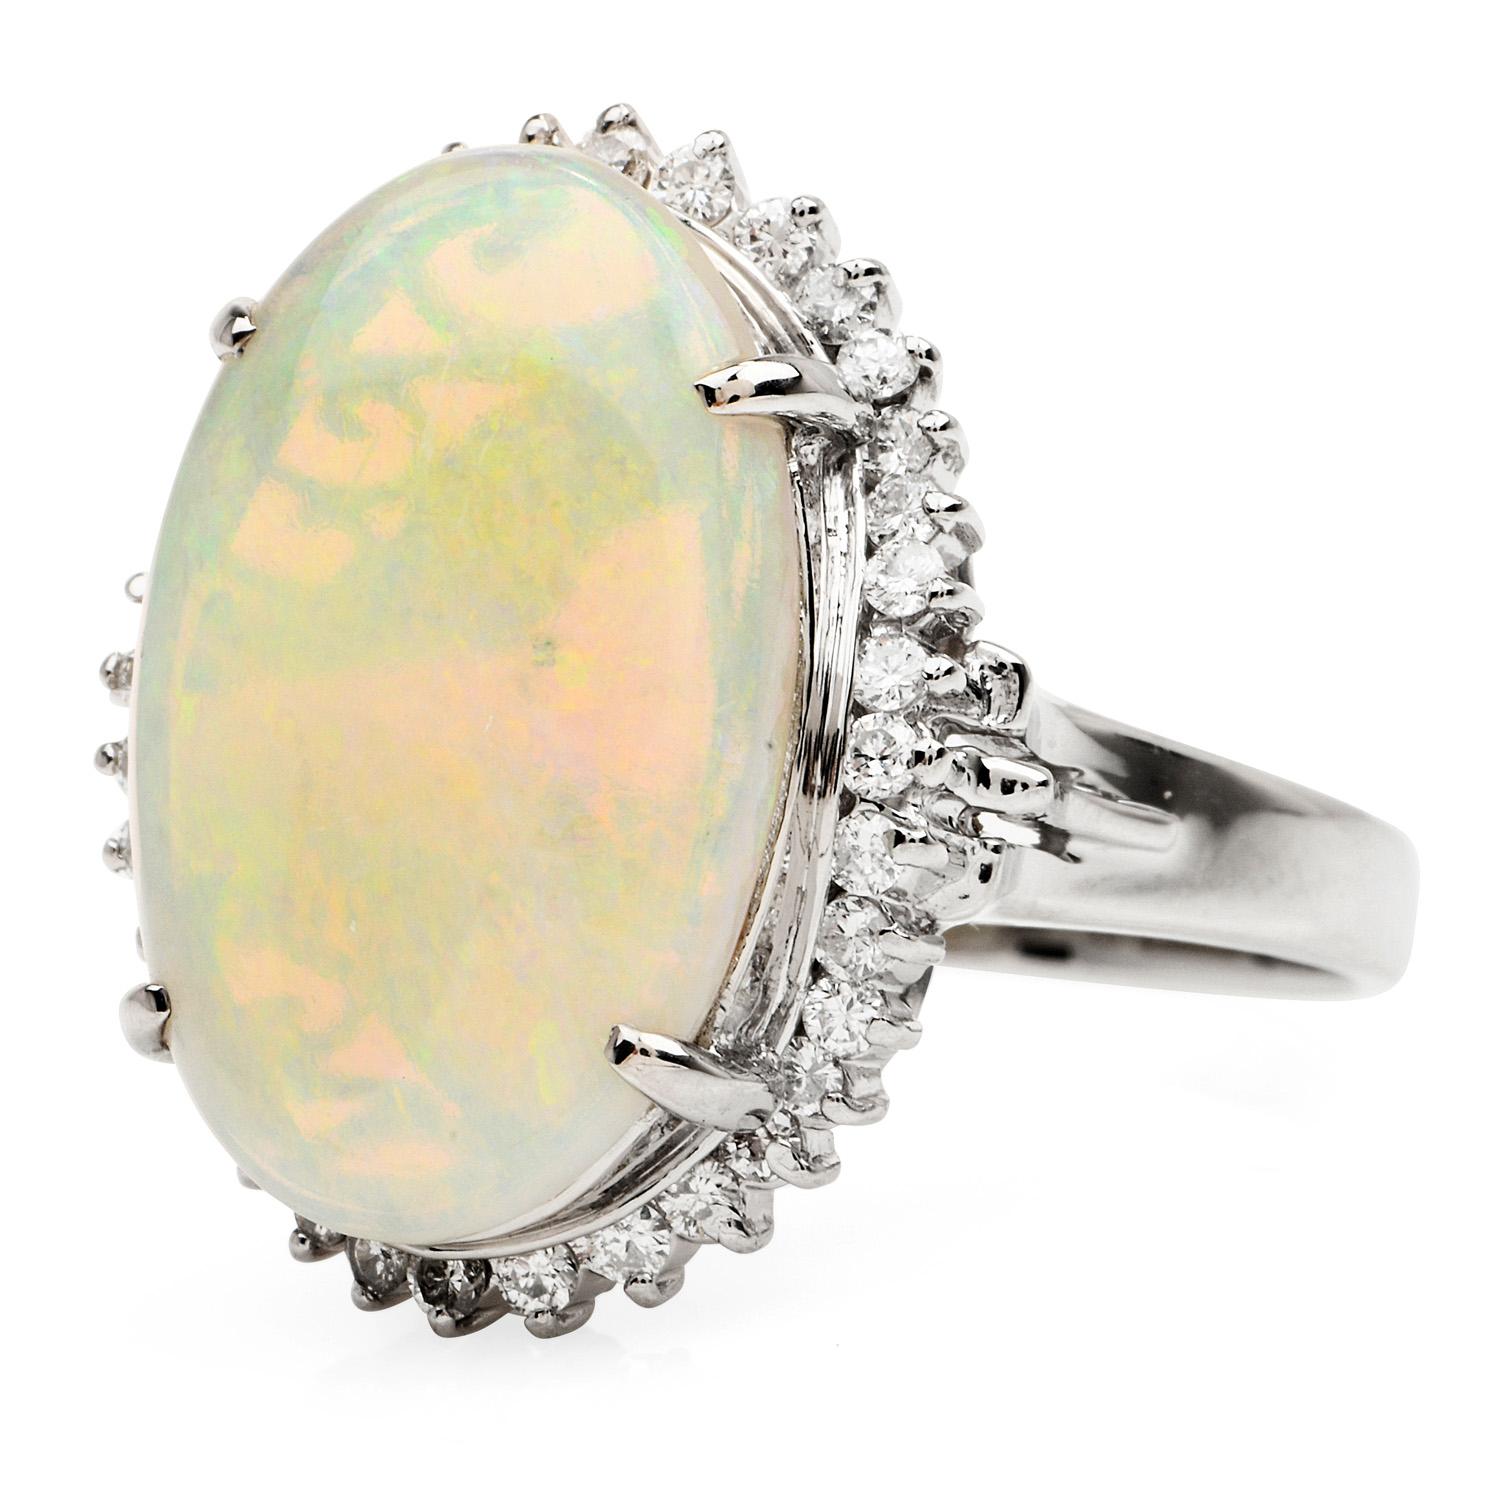 Multicolor genuine Opal & Diamond ring, with open style designs,

Crafted in solid Platinum, the center is adorned by a White Opal, cabochon oval cut & prong set weighing approximately 6.69 carats. 

Complimenting the sides, there are (10)